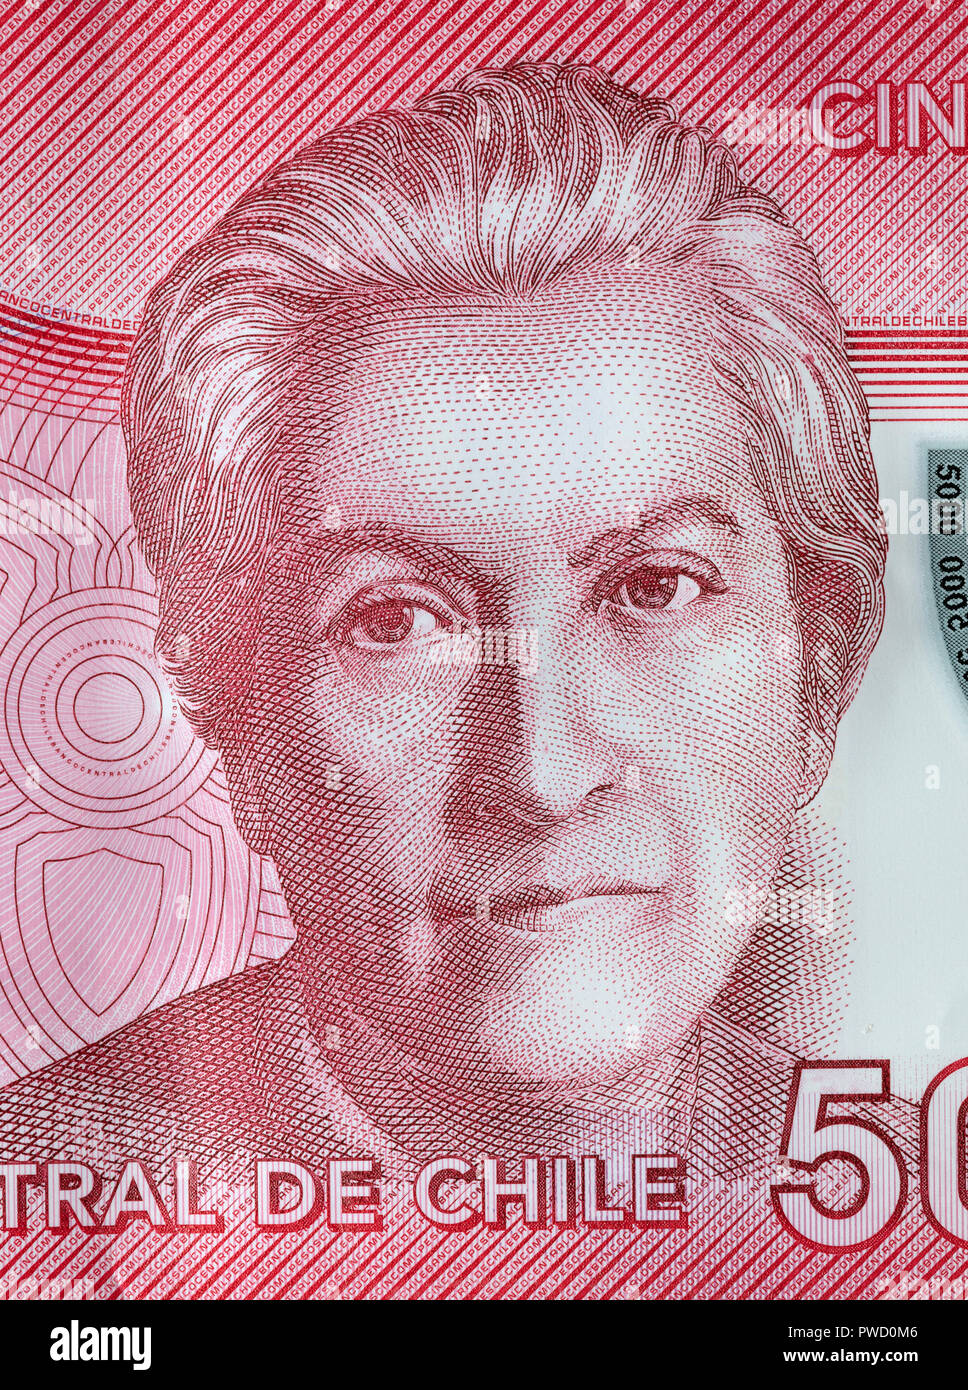 Portrait of Gabriela Mistral, from 5000 pesos banknote, Chile, 2013 Stock Photo